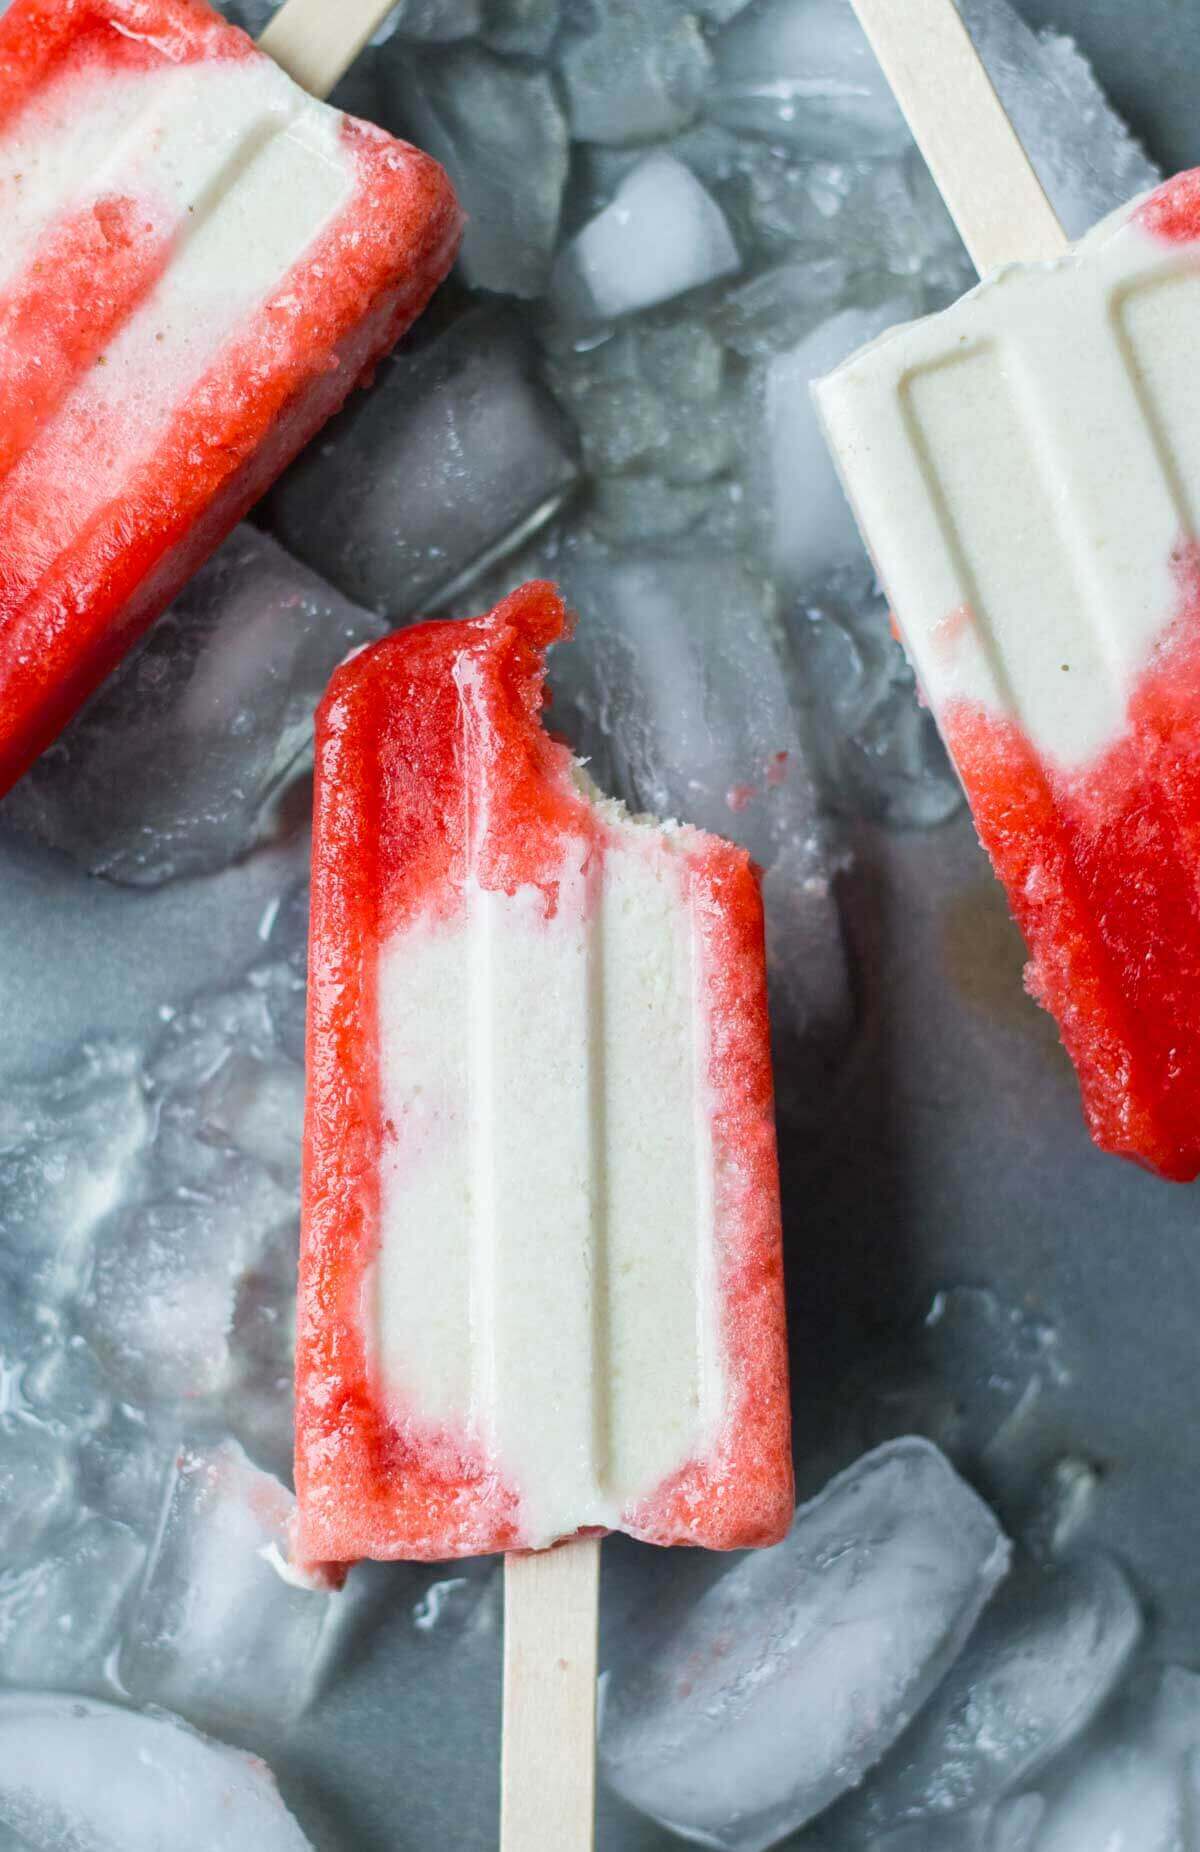 These paleo, gluten free and vegan popsicles are an easy summer/spring recipe to brighten up our day. The creamy layer is made with raw cashews and coconut milk and the strawberry layer is made with fresh strawberries and lemon. Both layers are sweetened slightly with pure maple syrup for a cool and sweet snack or dessert.